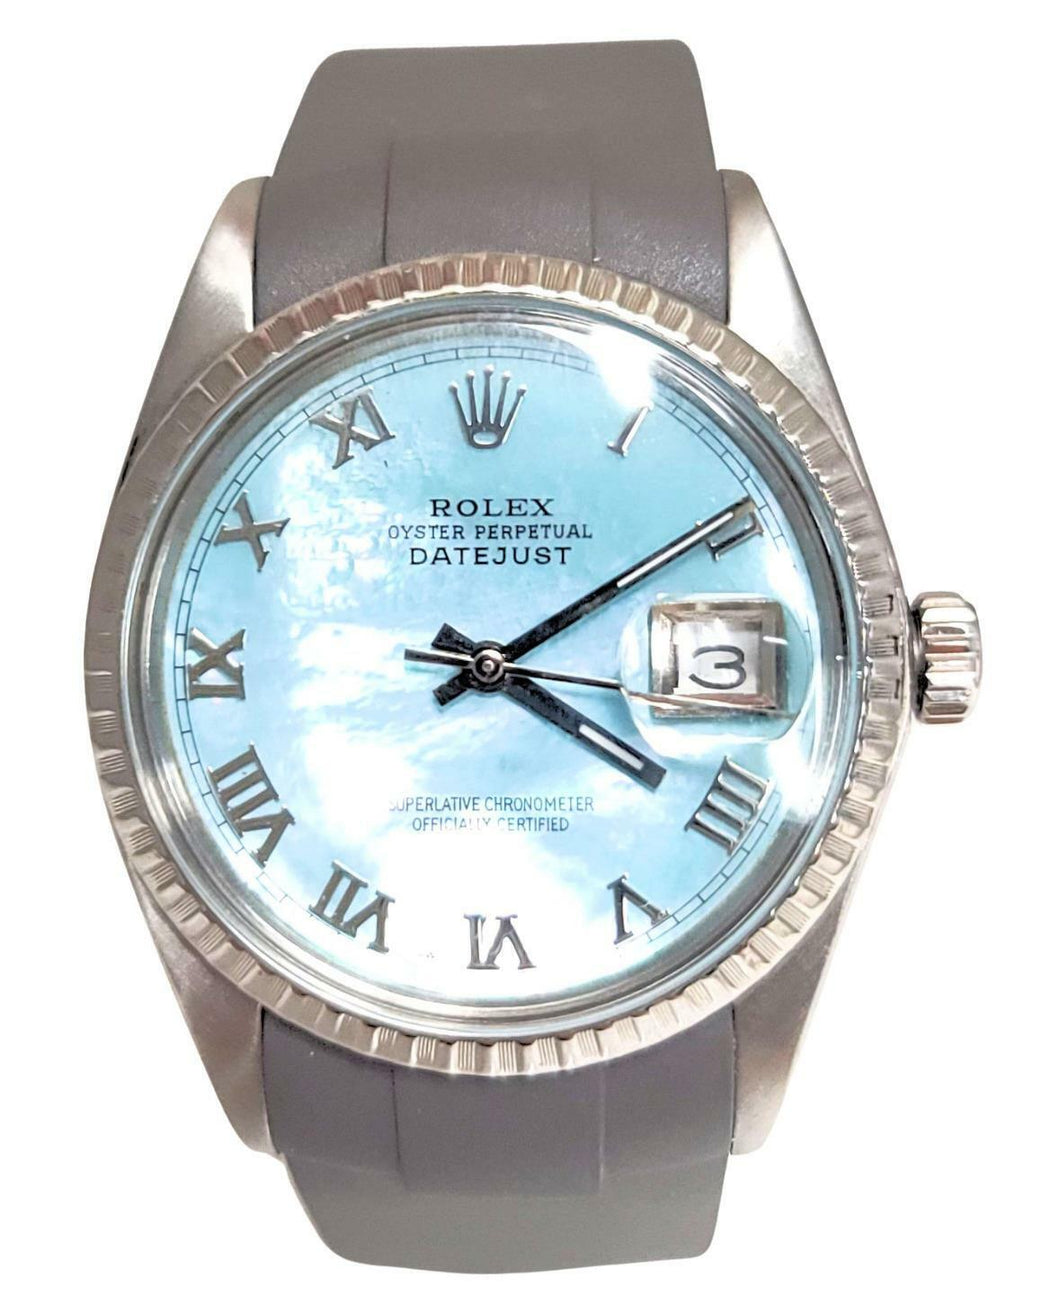 36mm ROLEX DATEJUST STAINLESS STEEL BLUE MOTHER OF PEARL DIAL WATCH